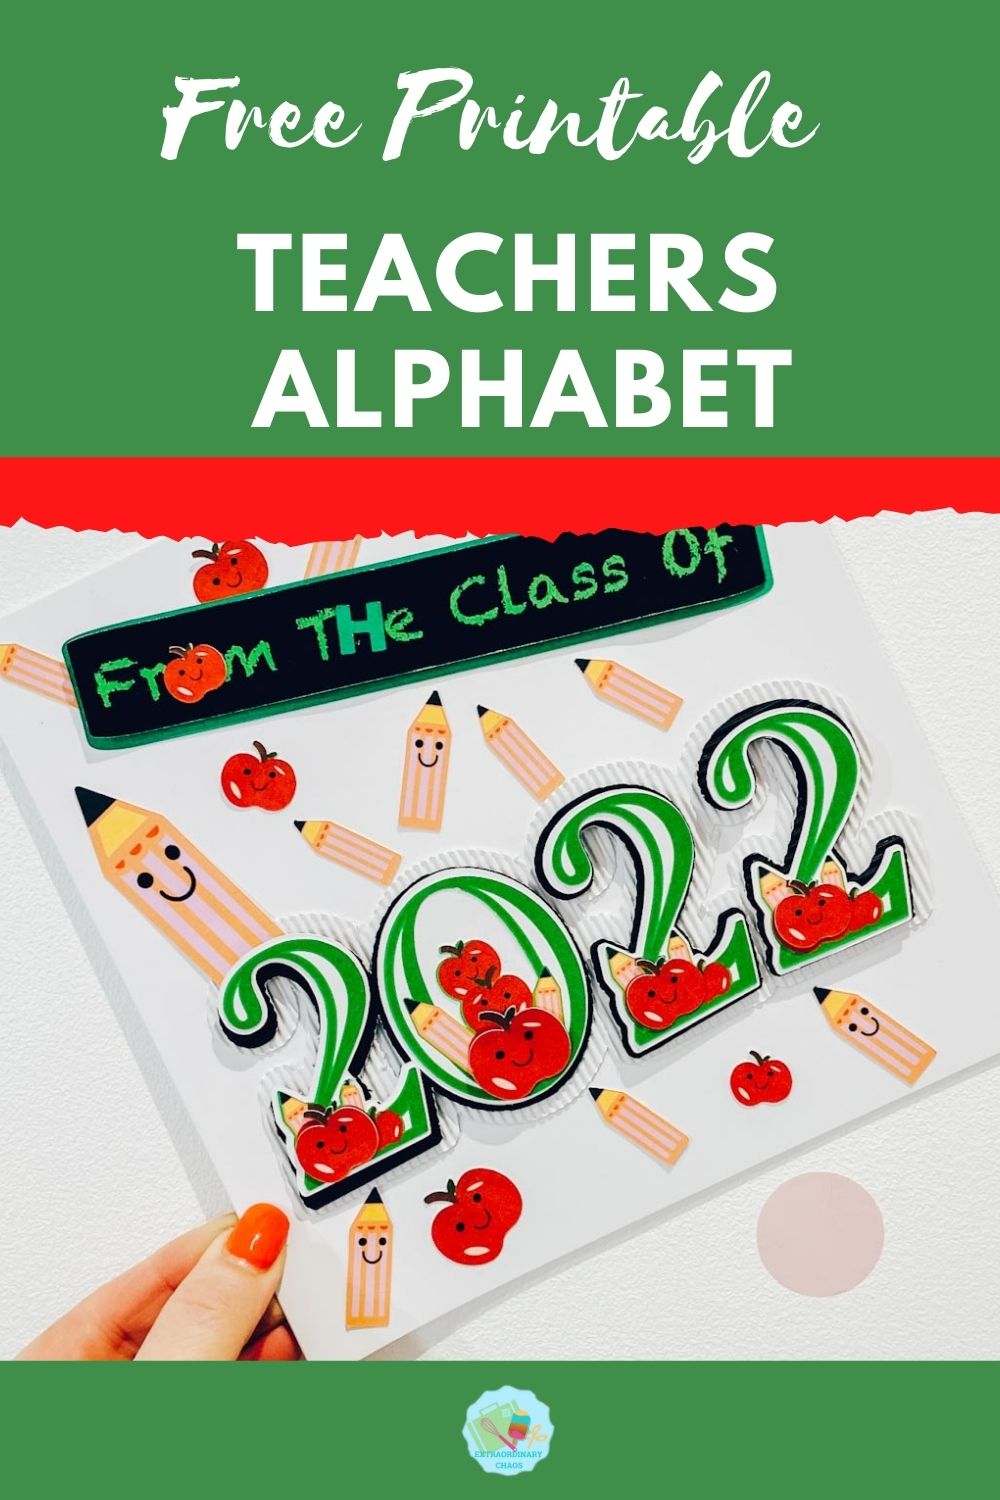 Free Printable Teachers PNG Alphabet for cards, gifts and sublimation